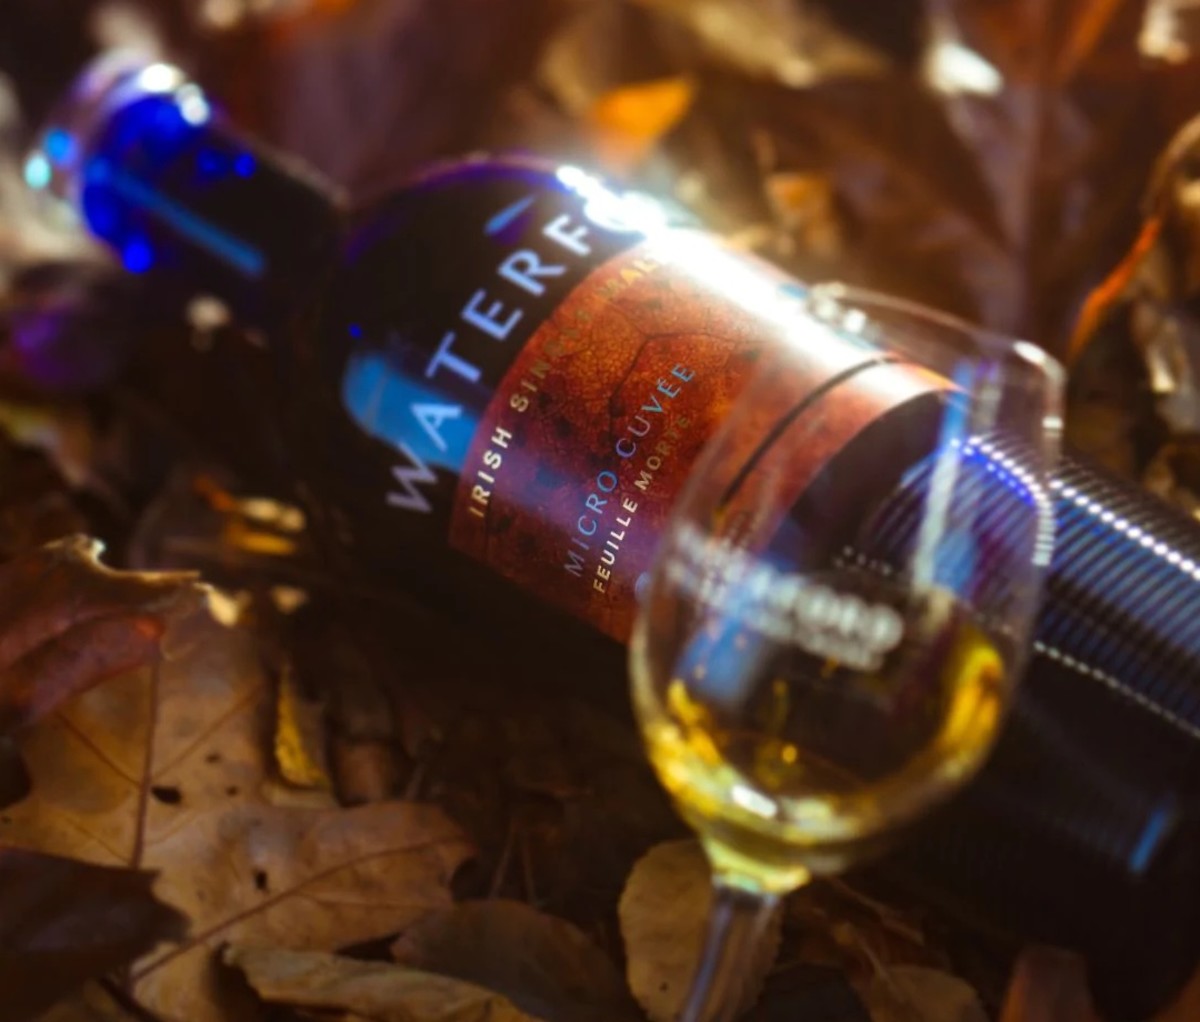 Bottle of Micro Cuvée: Hearth from Waterford Whisky nestled on leaves